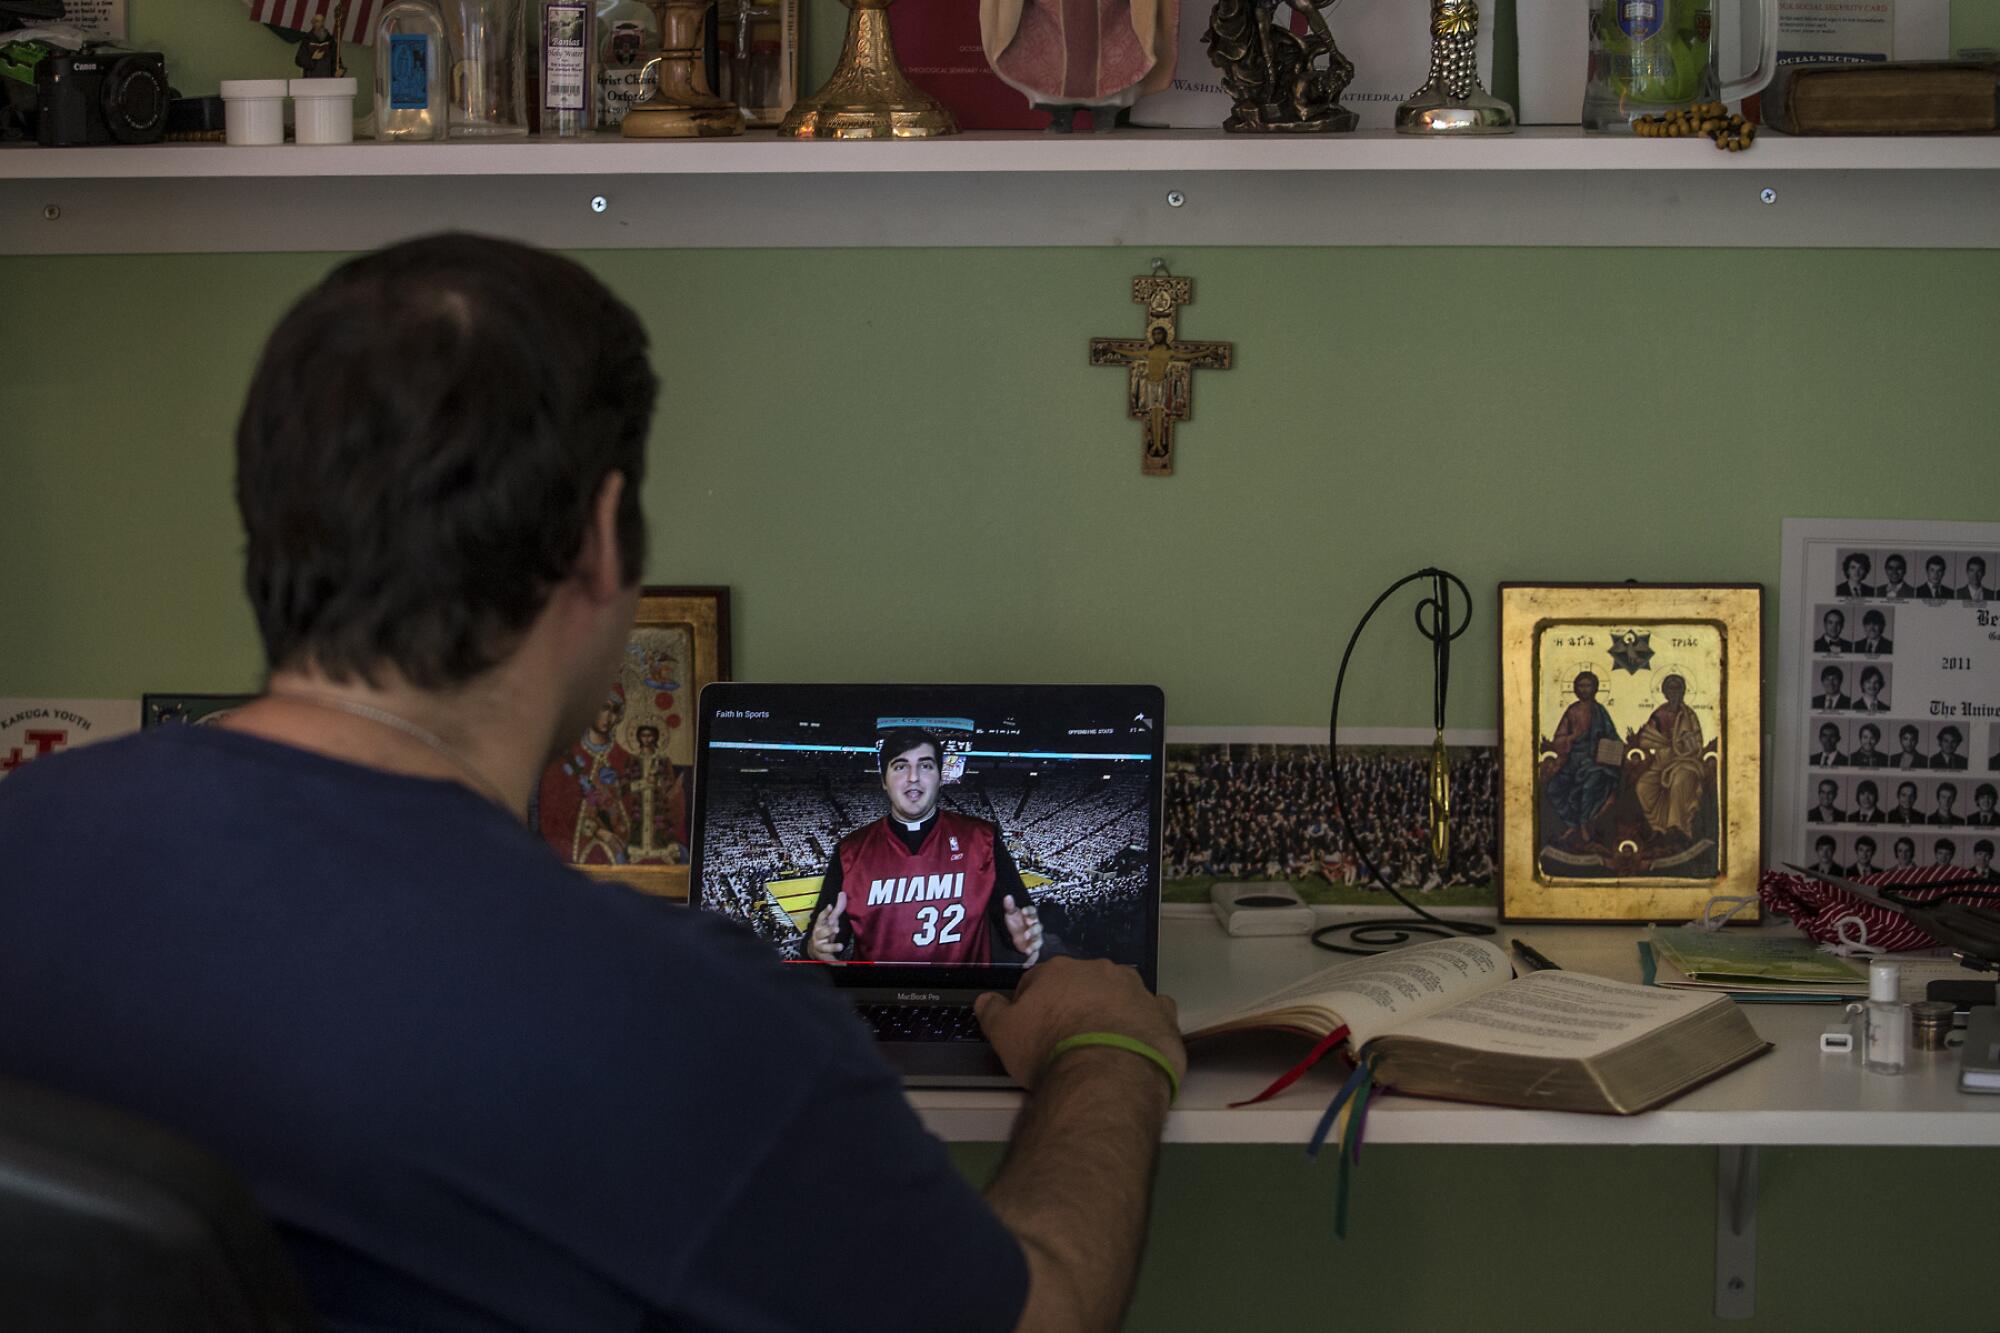 Sahdev has created videos to connect with his congregation from his apartment near the church.